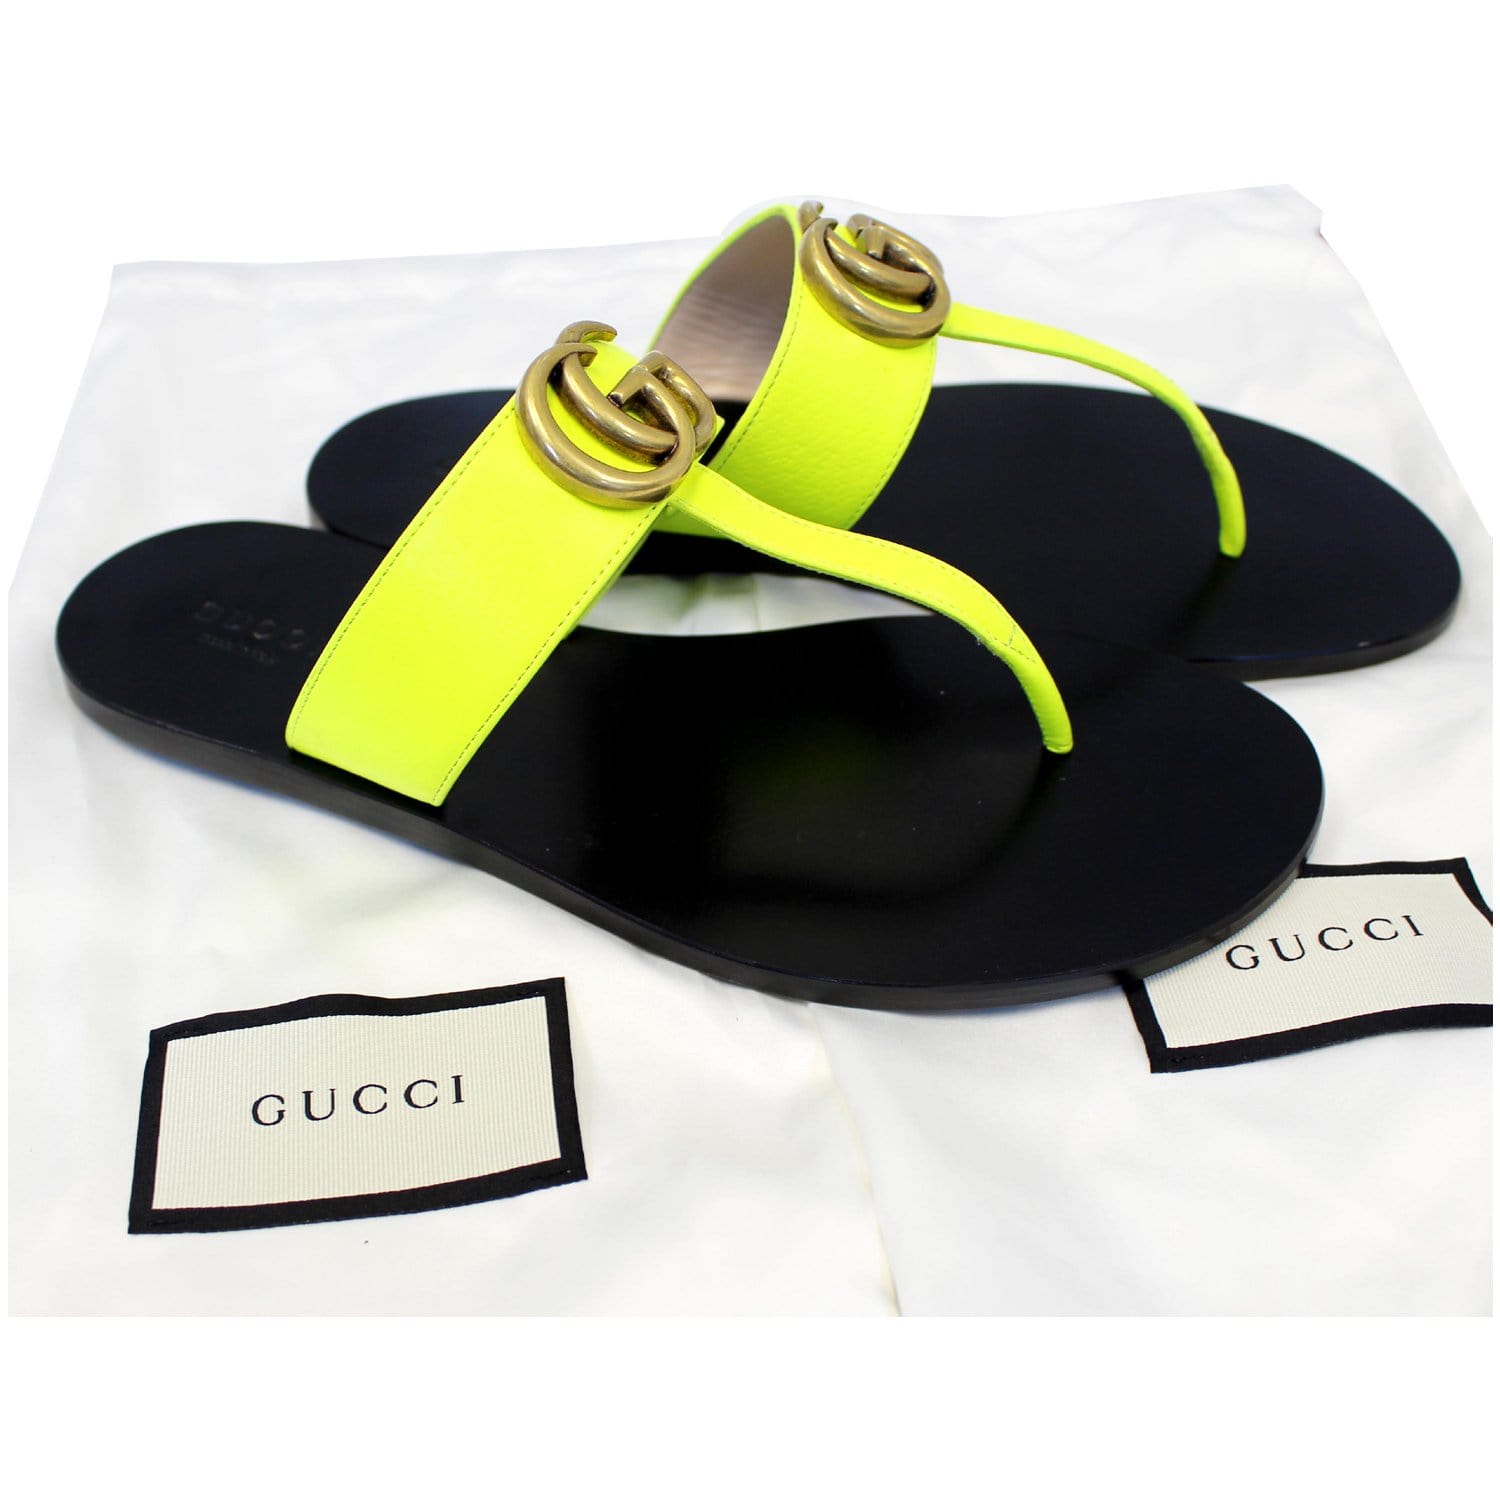 GUCCI GG Marmont Leather Thong Sandal Green 7 US